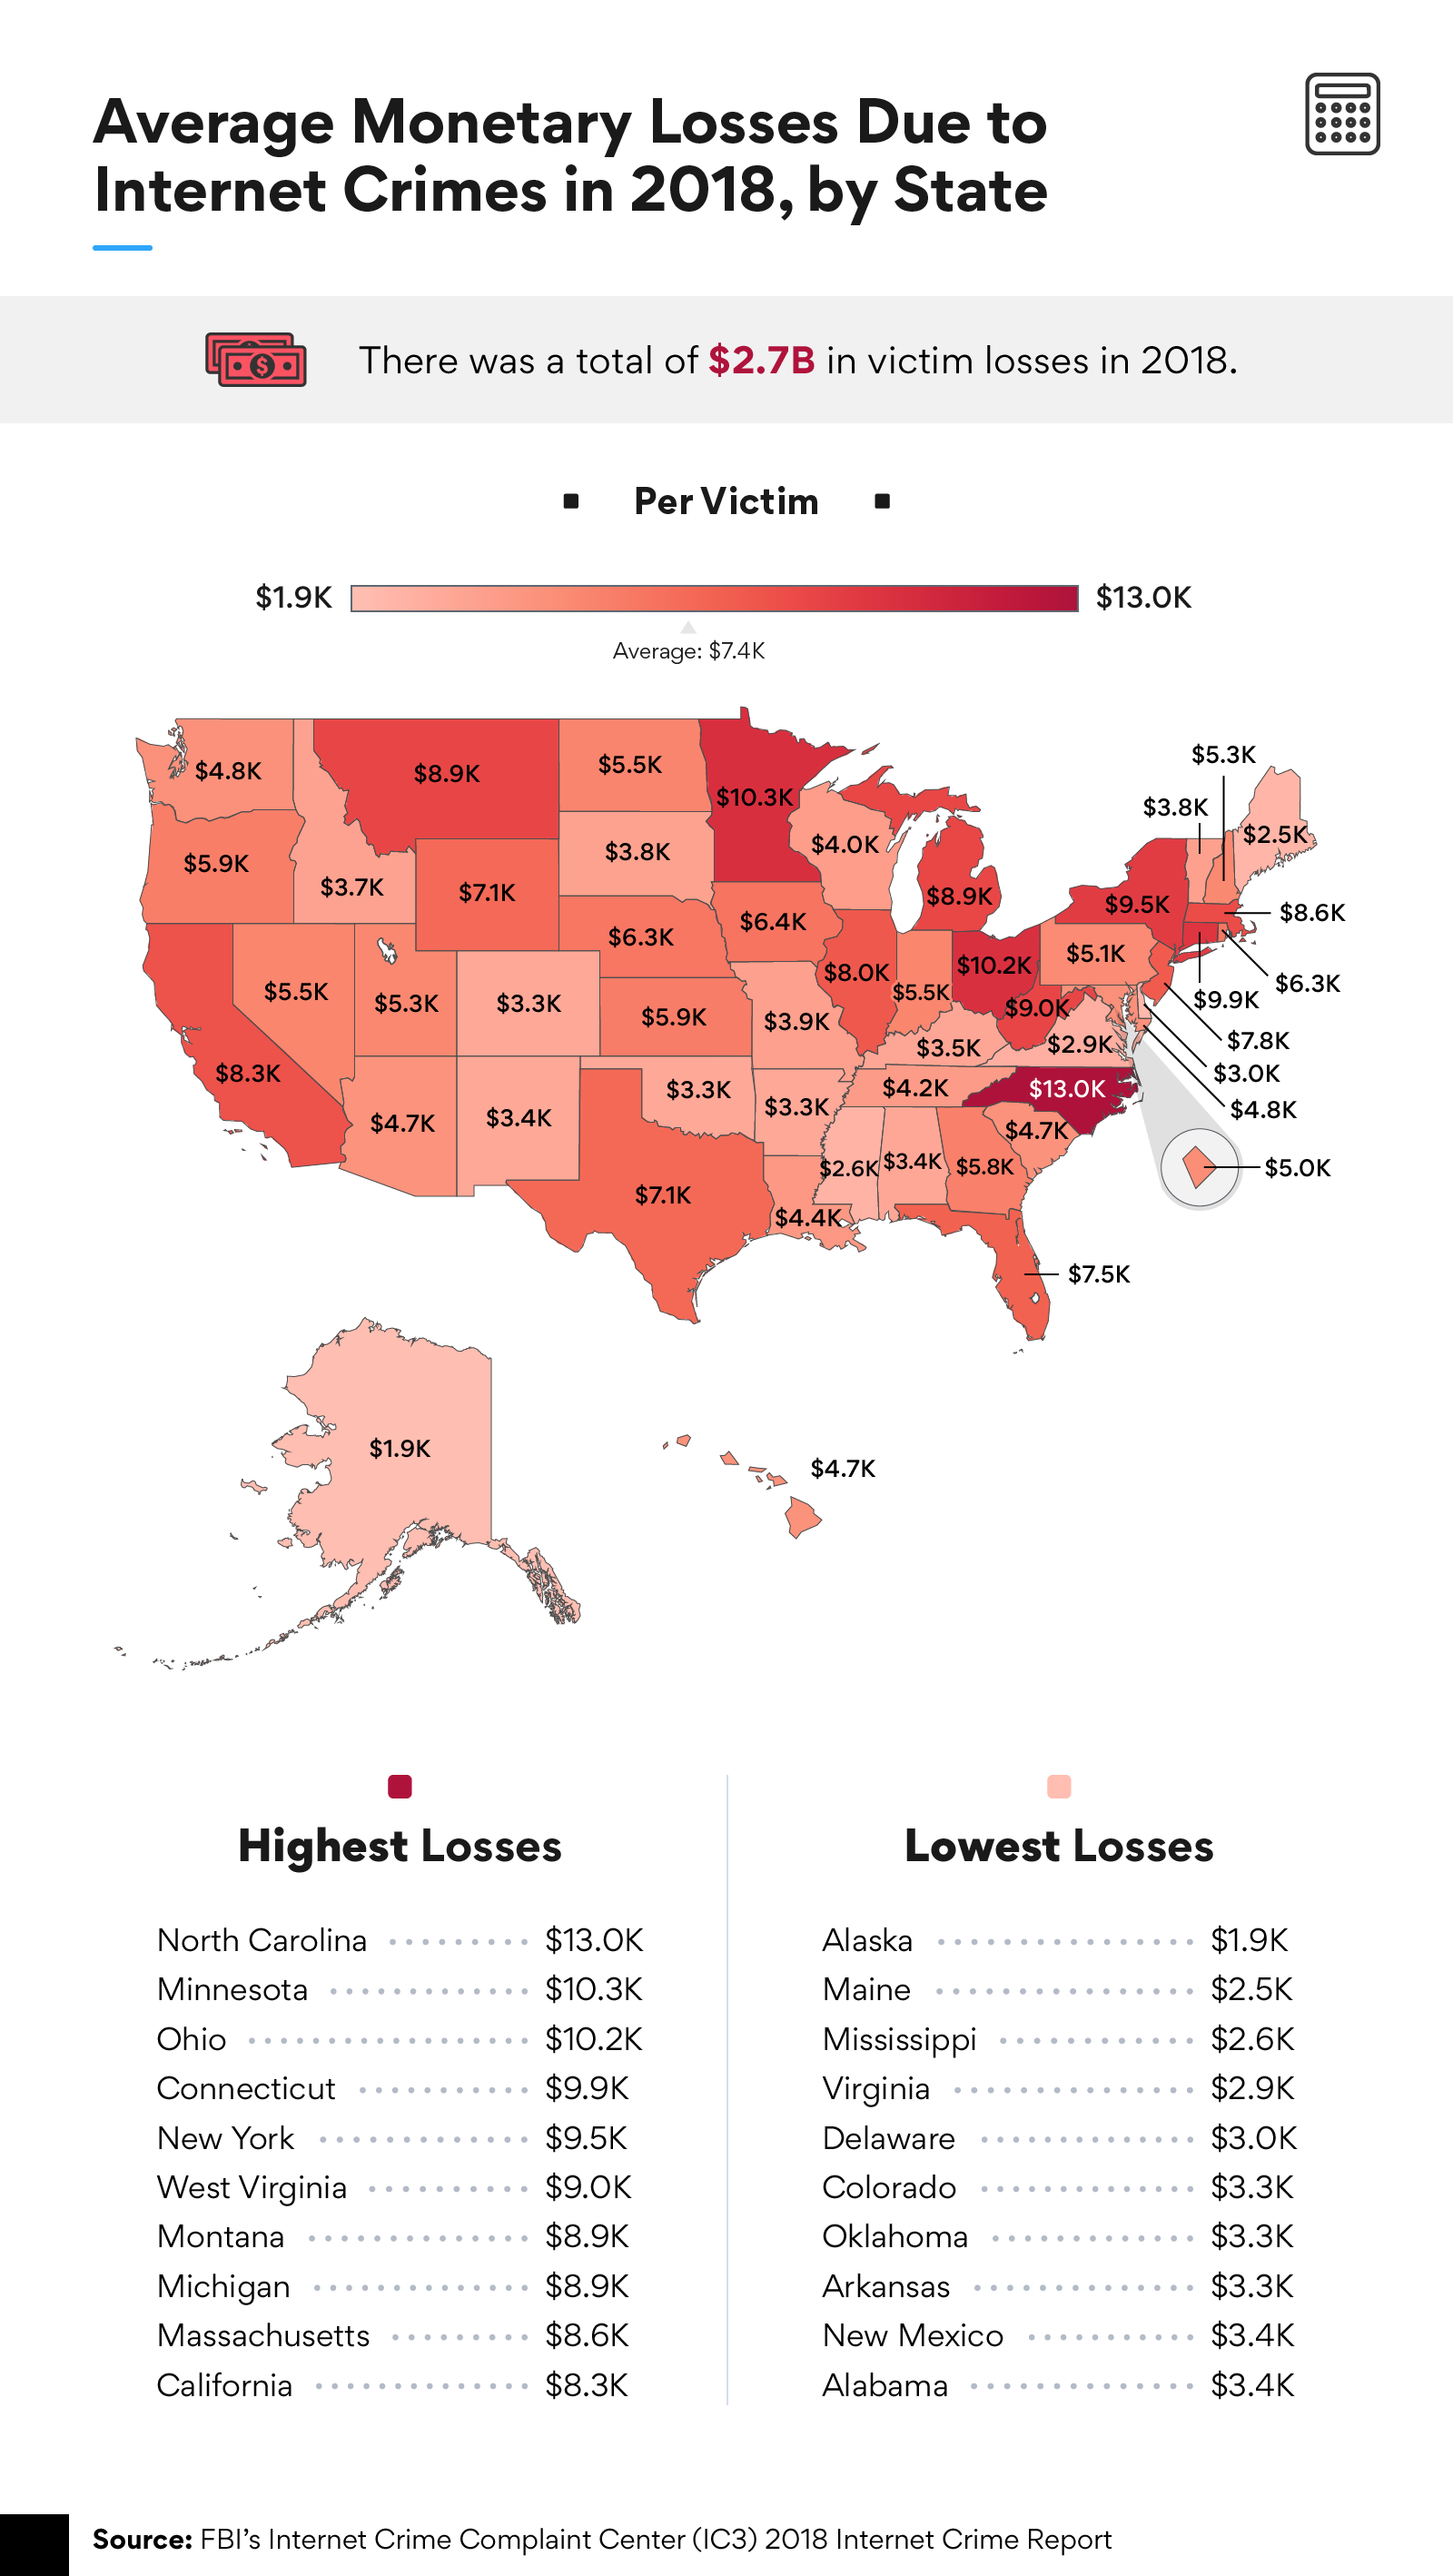 Average Monetary Losses Due to Internet Crimes in 2018, by State